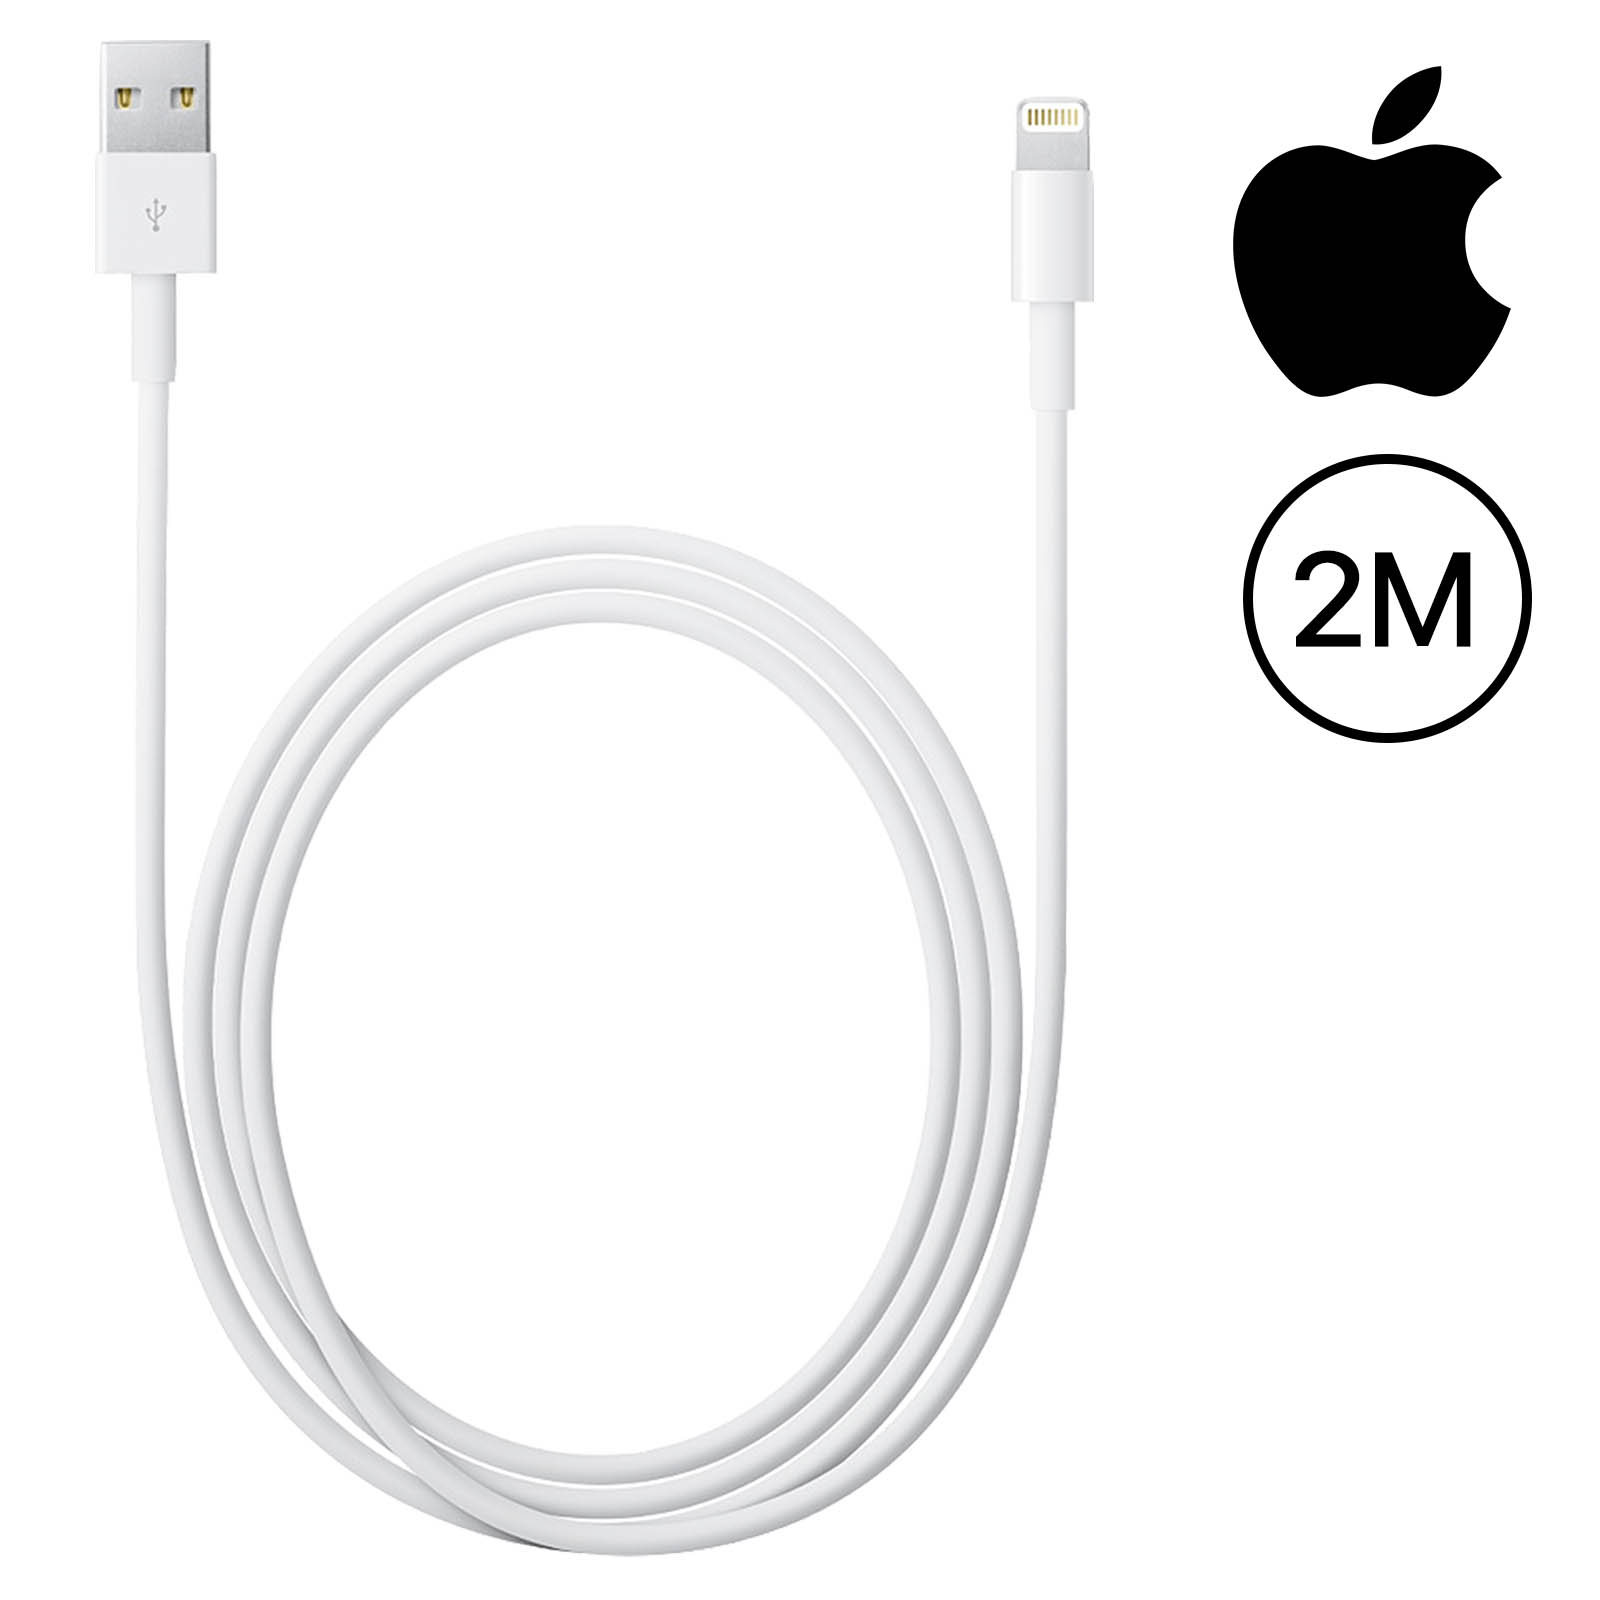 Cable iPhone - iPad Original Apple long. 2m connect. Lightning